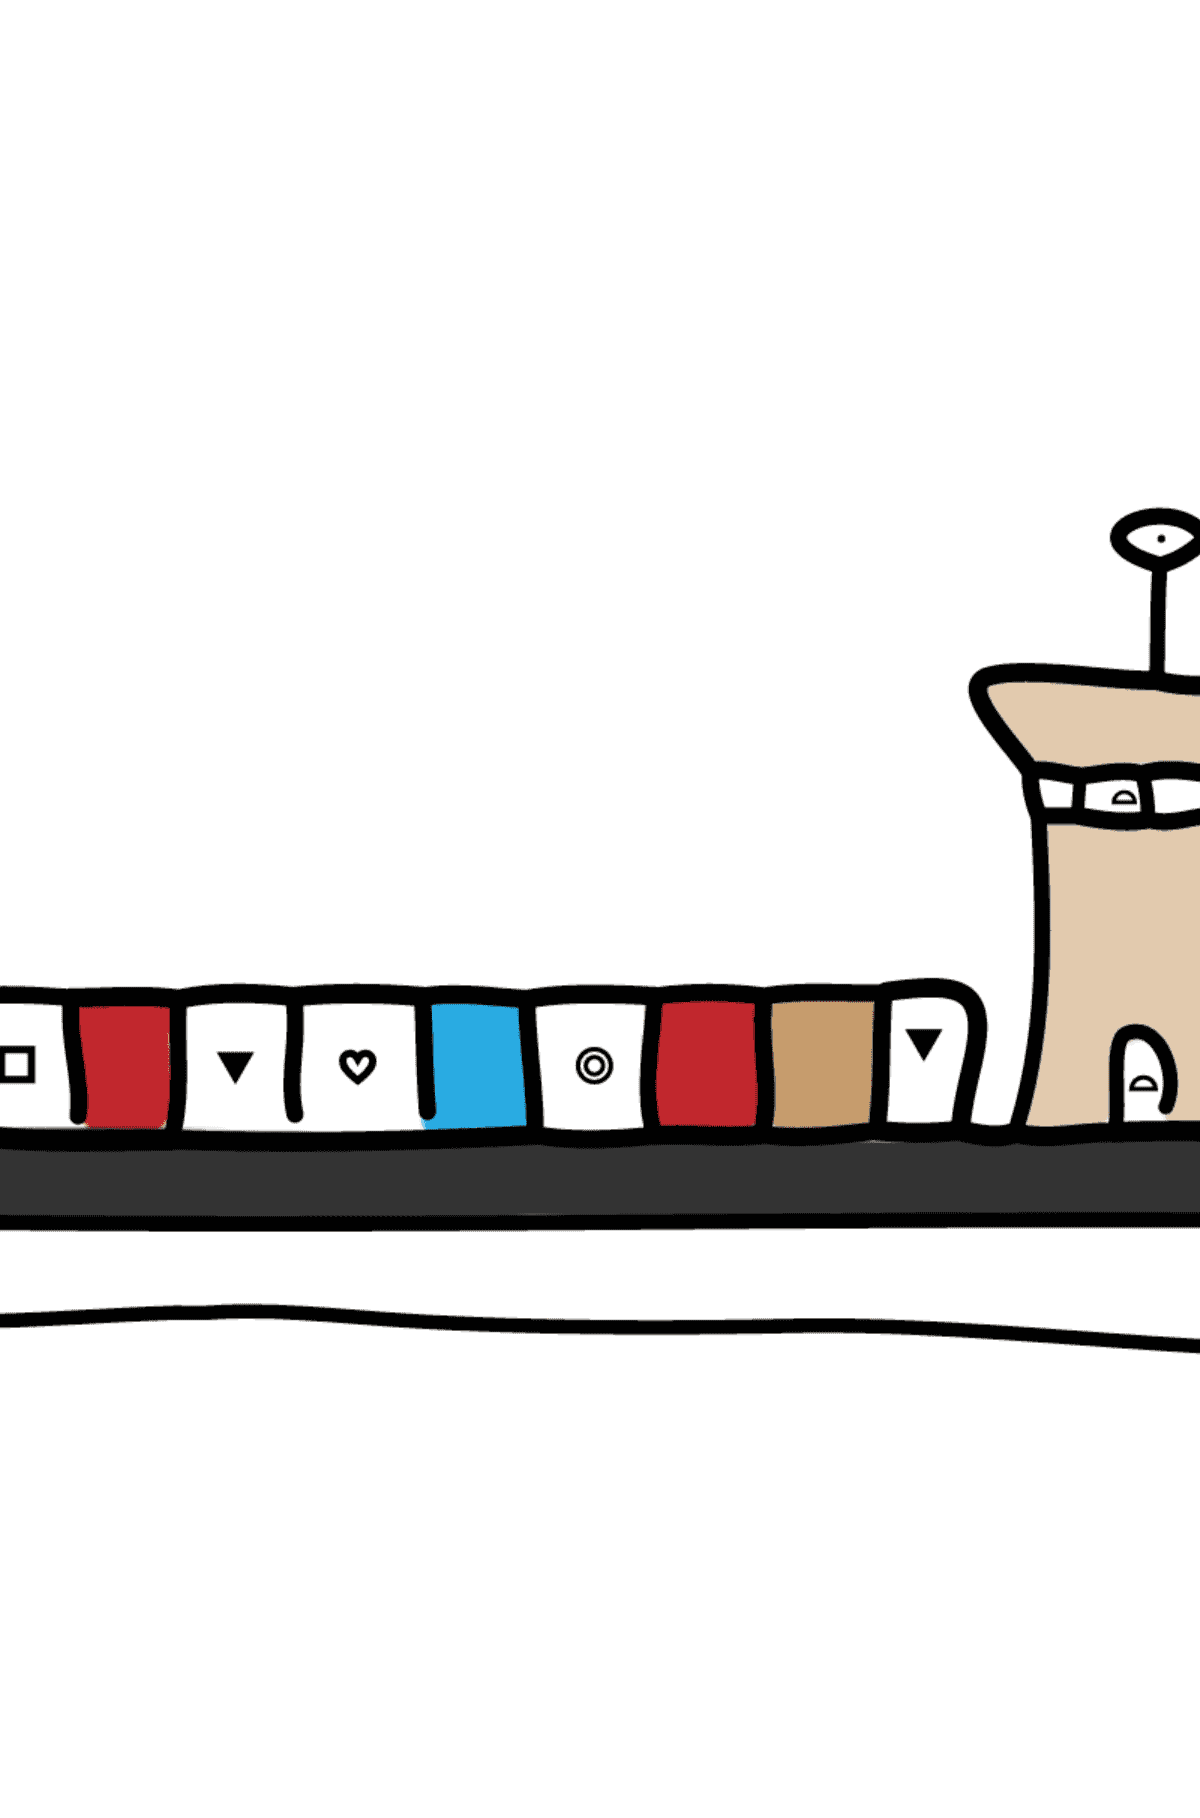 Coloring Page - A Dry Cargo Barge - Coloring by Symbols and Geometric Shapes for Children